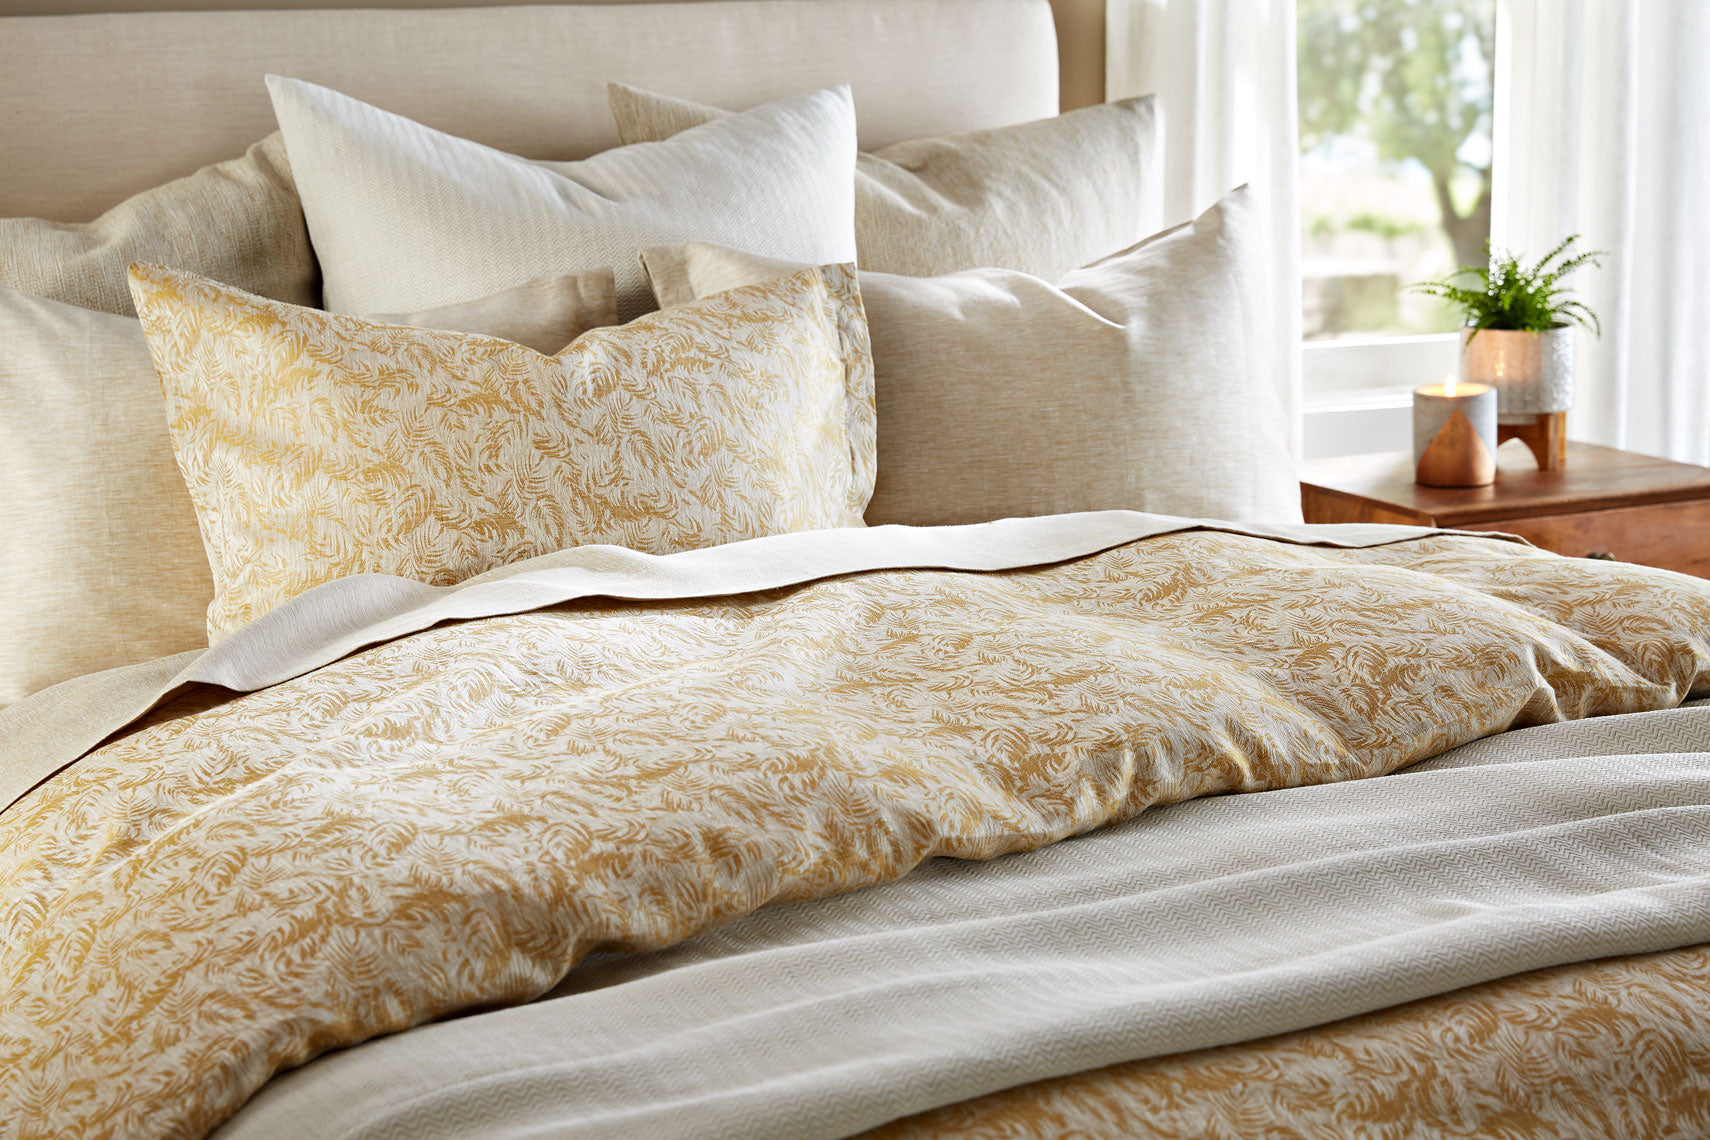 York Dijon bedding shown on bed with coordinating other bedding